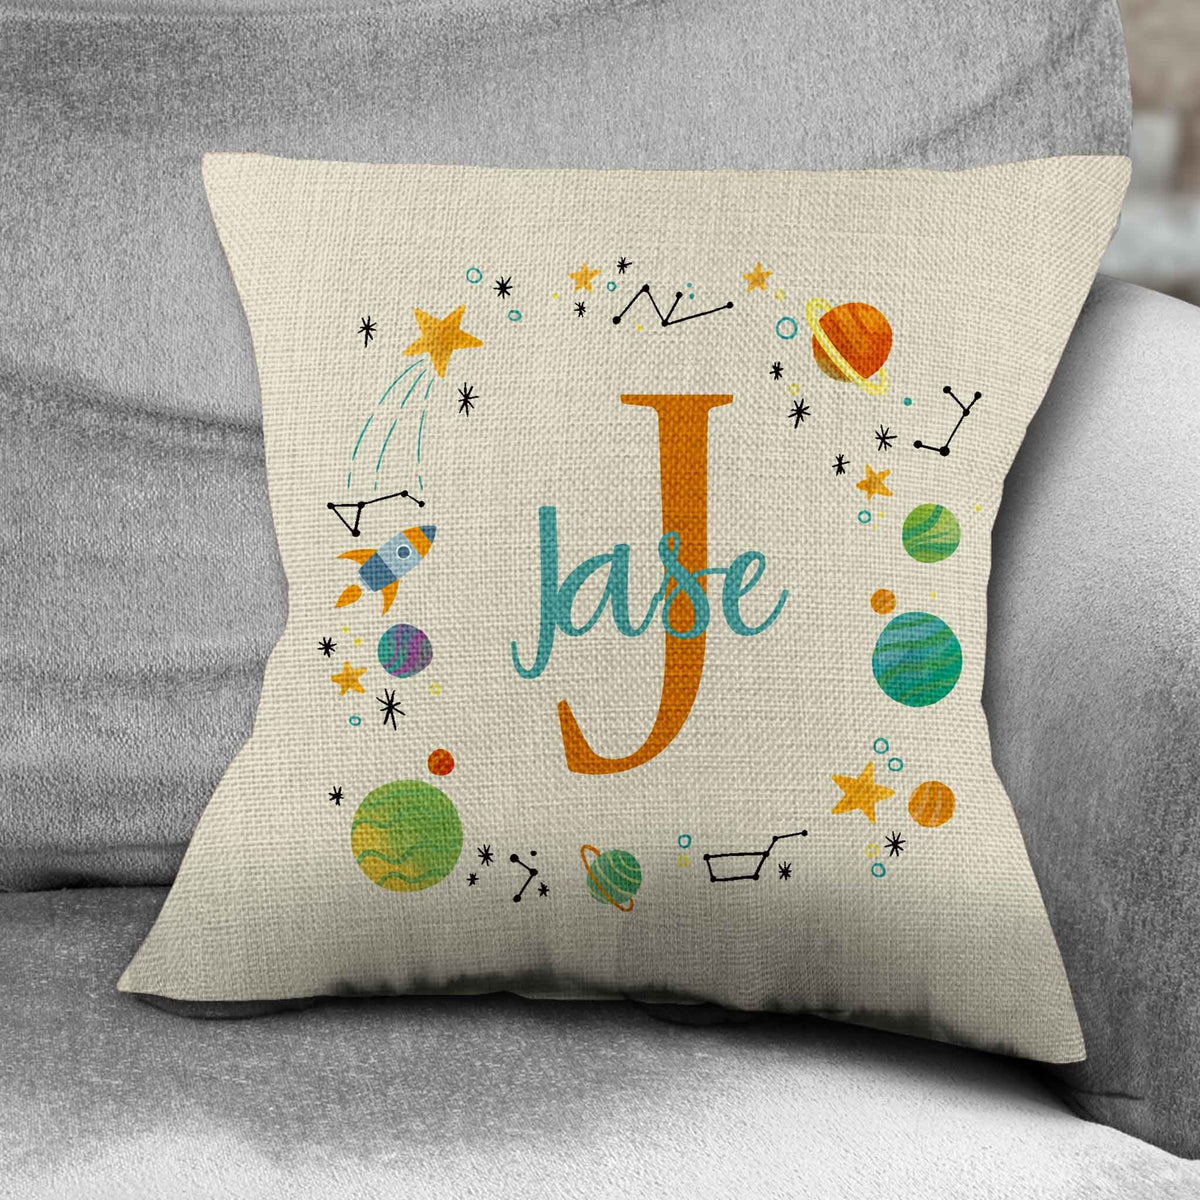 Personalized Throw Pillow | Custom Decorative Pillow | Outerspace